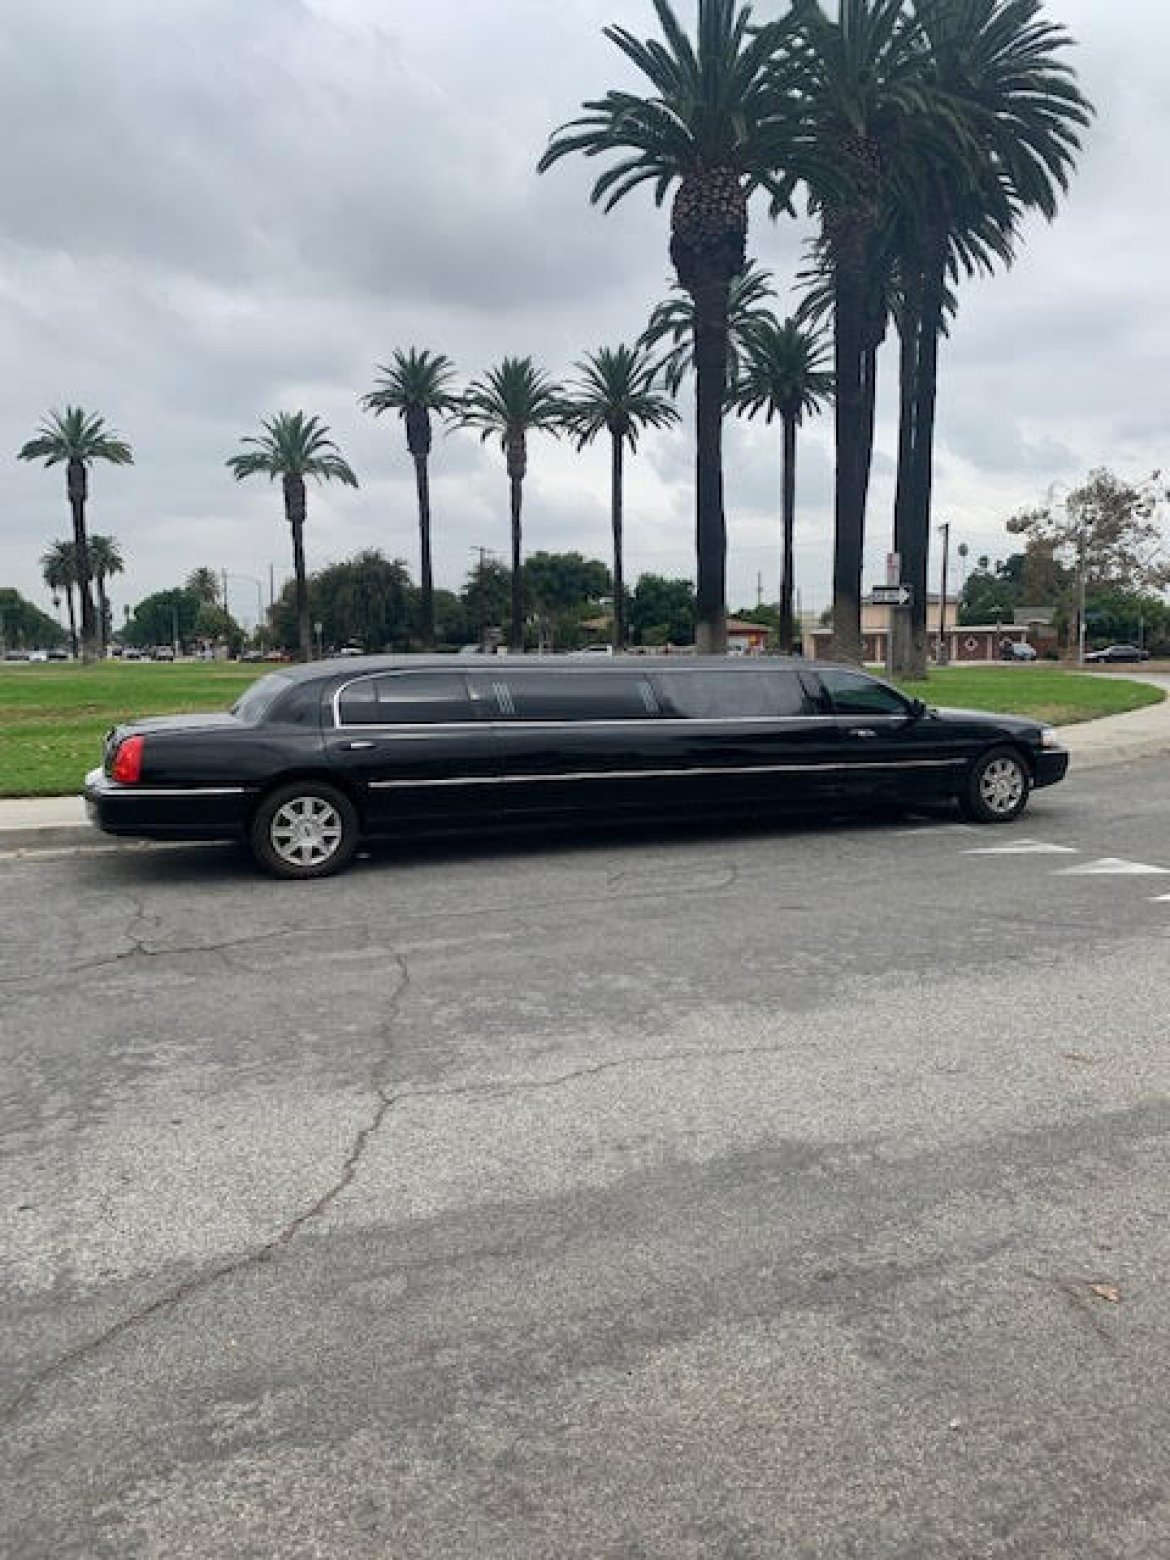 Limousine for sale: 2011 Lincoln 2011 LINCOLN TOWN CAR by LINCOLN